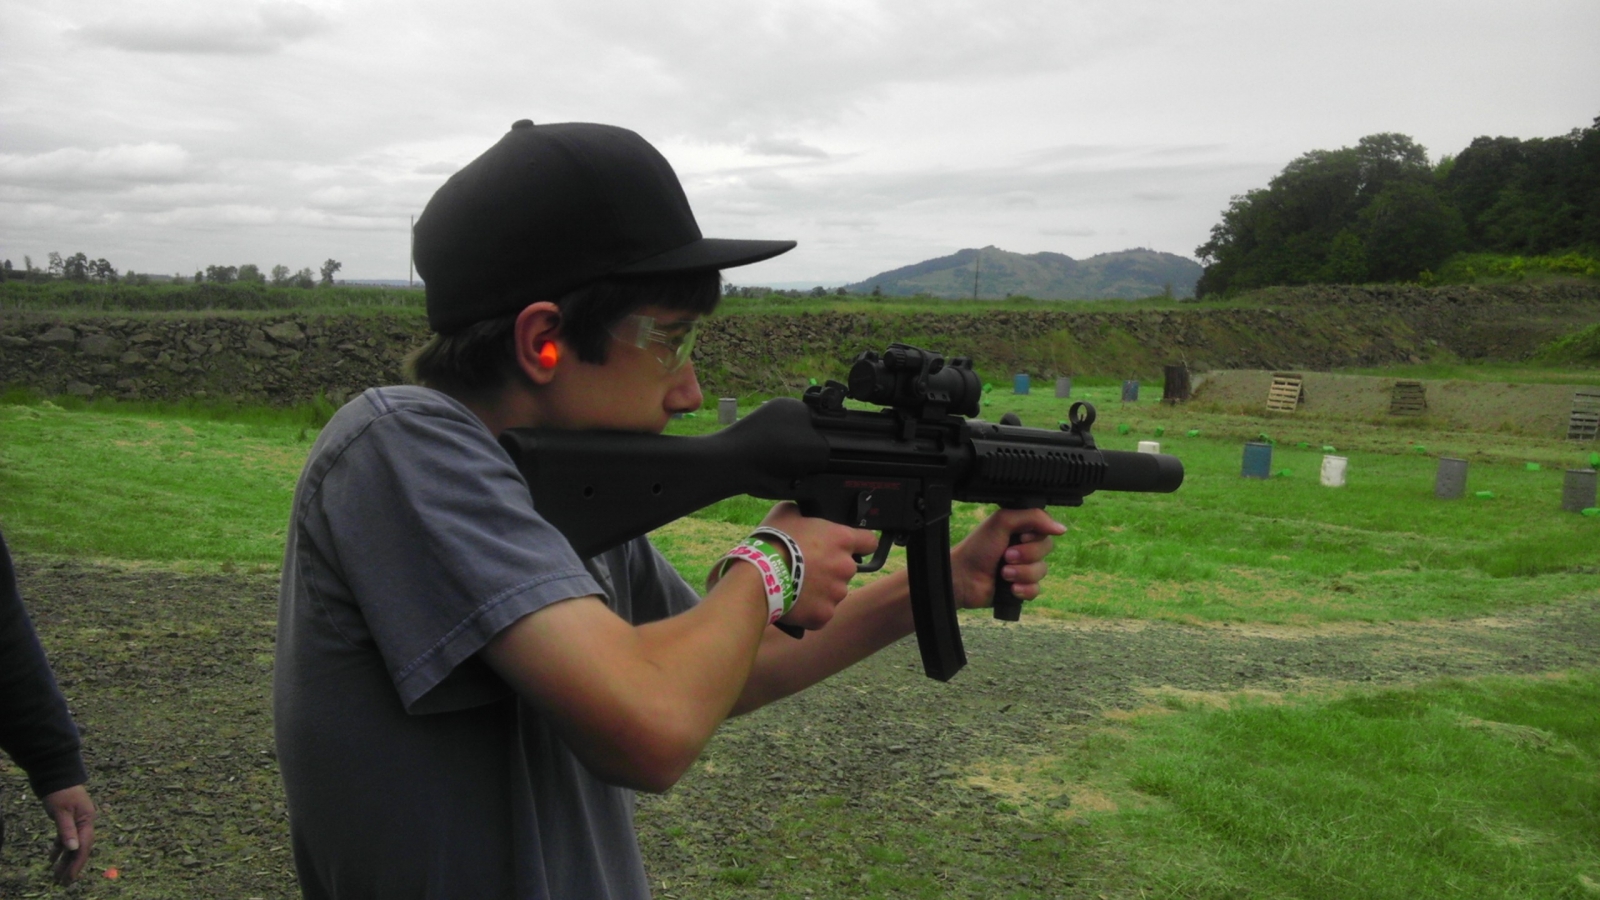 son with suppressed MP5